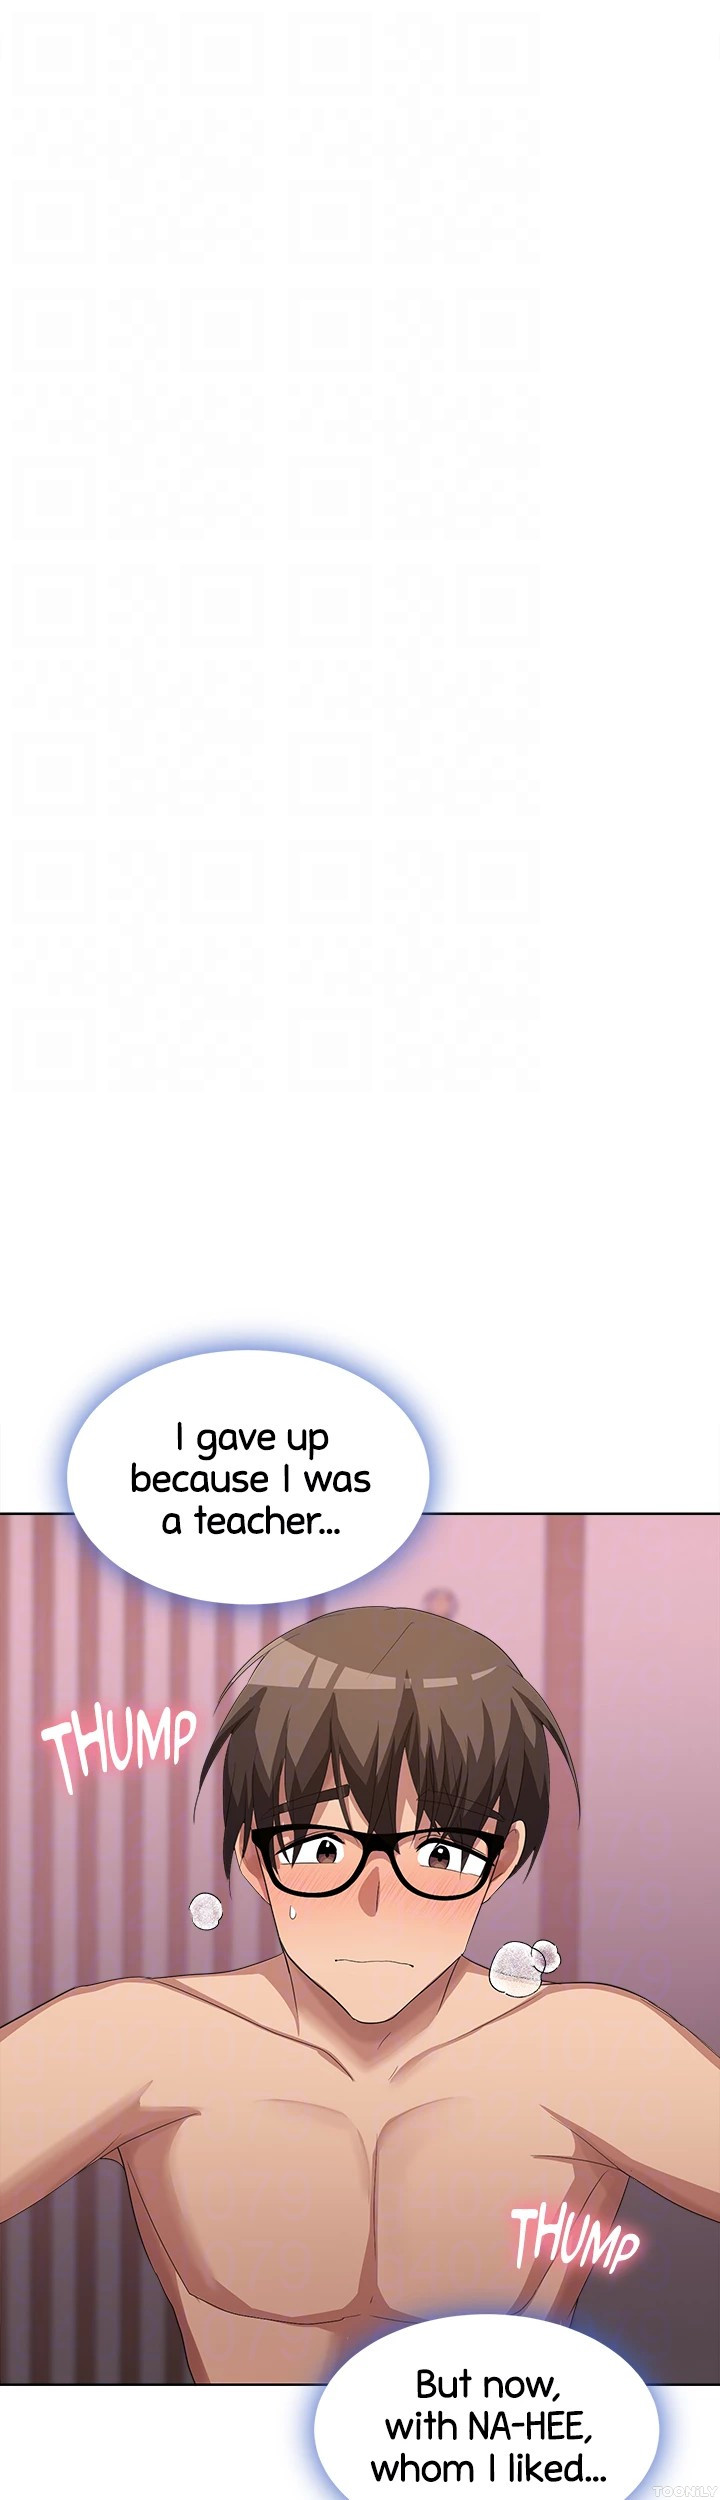 Girls I Used to Teach - Chapter 12 Page 31